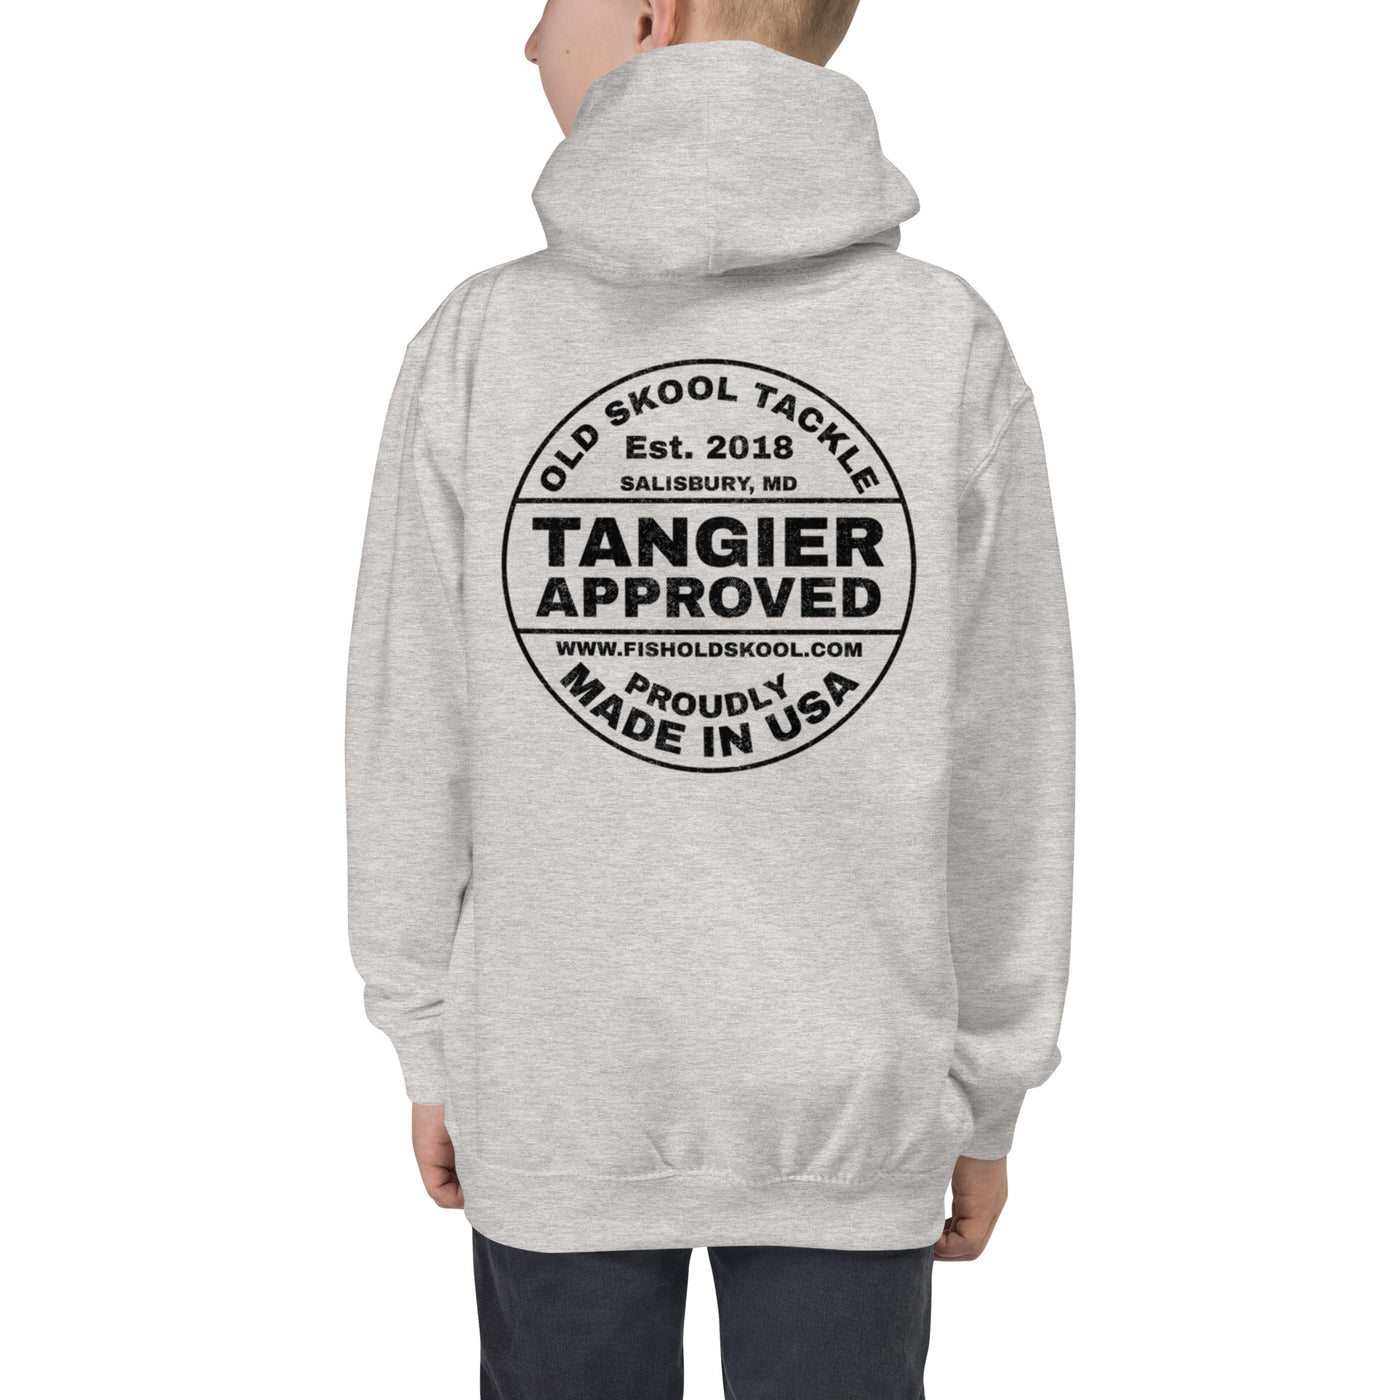 Kids Hoodie - Tangier Approved